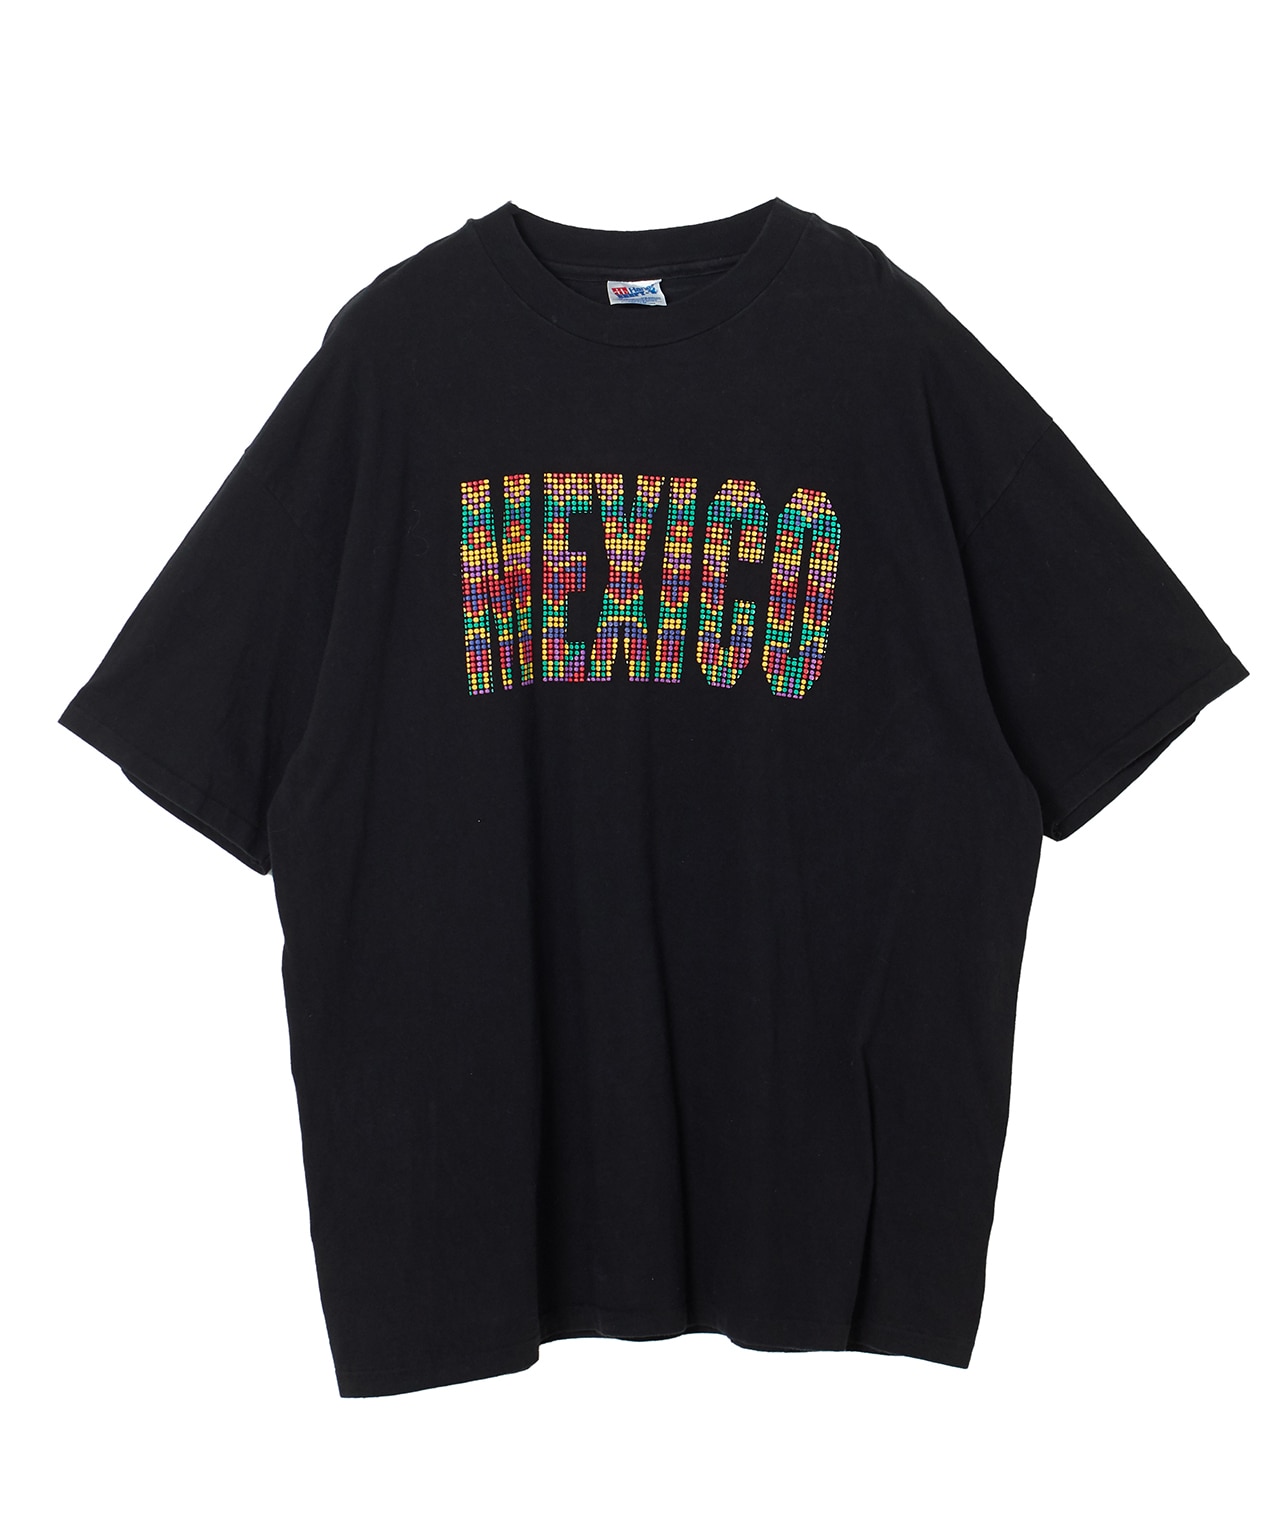 USED/90's MEXICO T SHIRT 詳細画像 ブラック 1